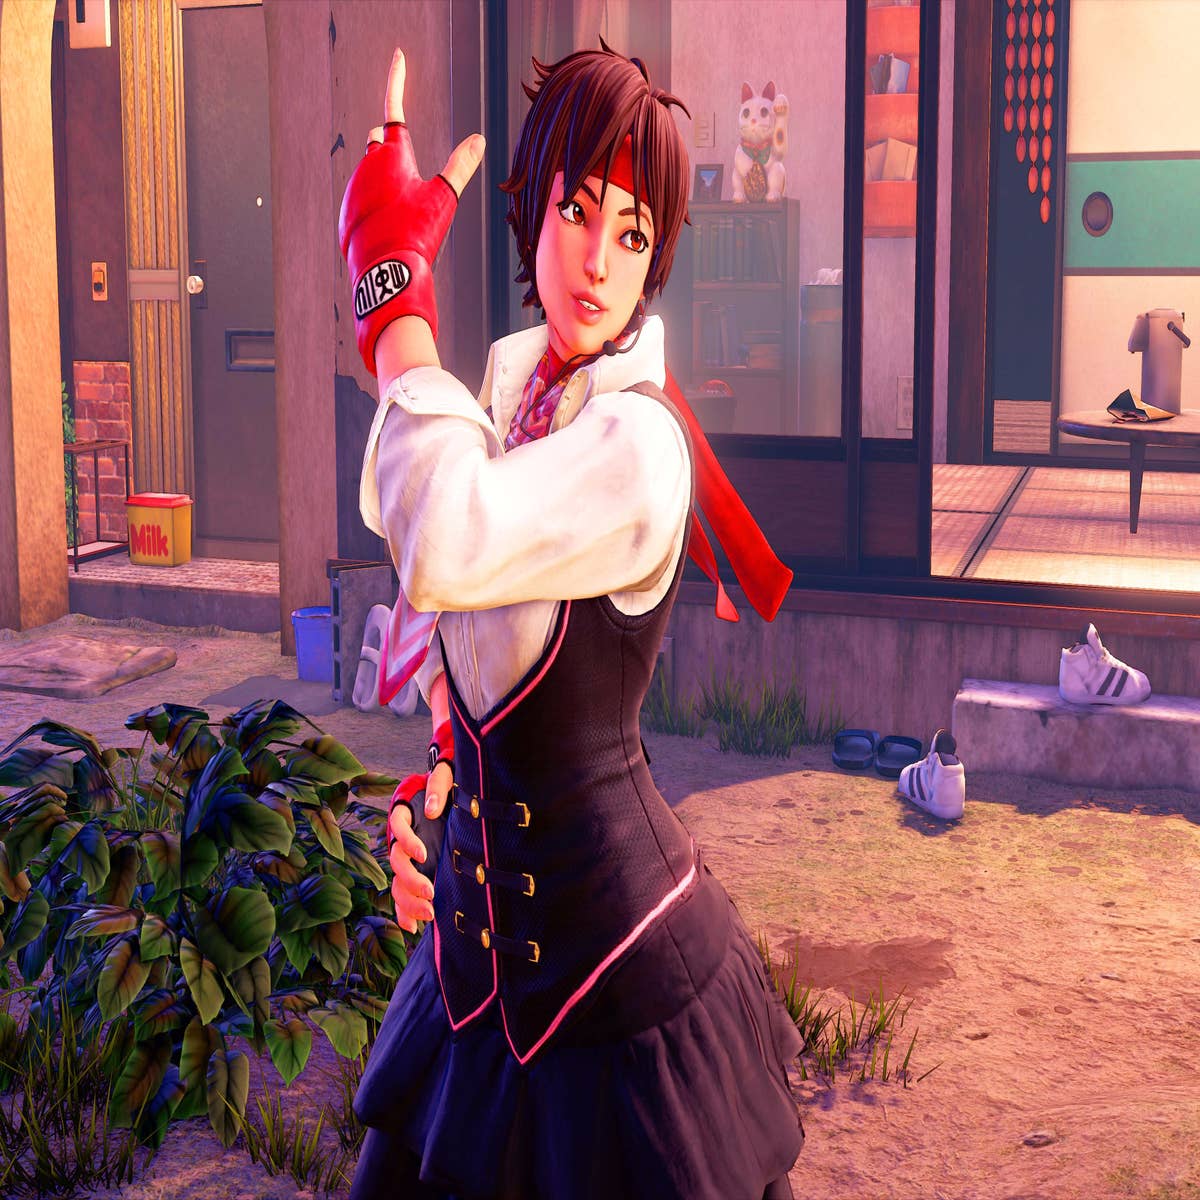 Street Fighter V to receive fifth and final season of DLC, 'Season V